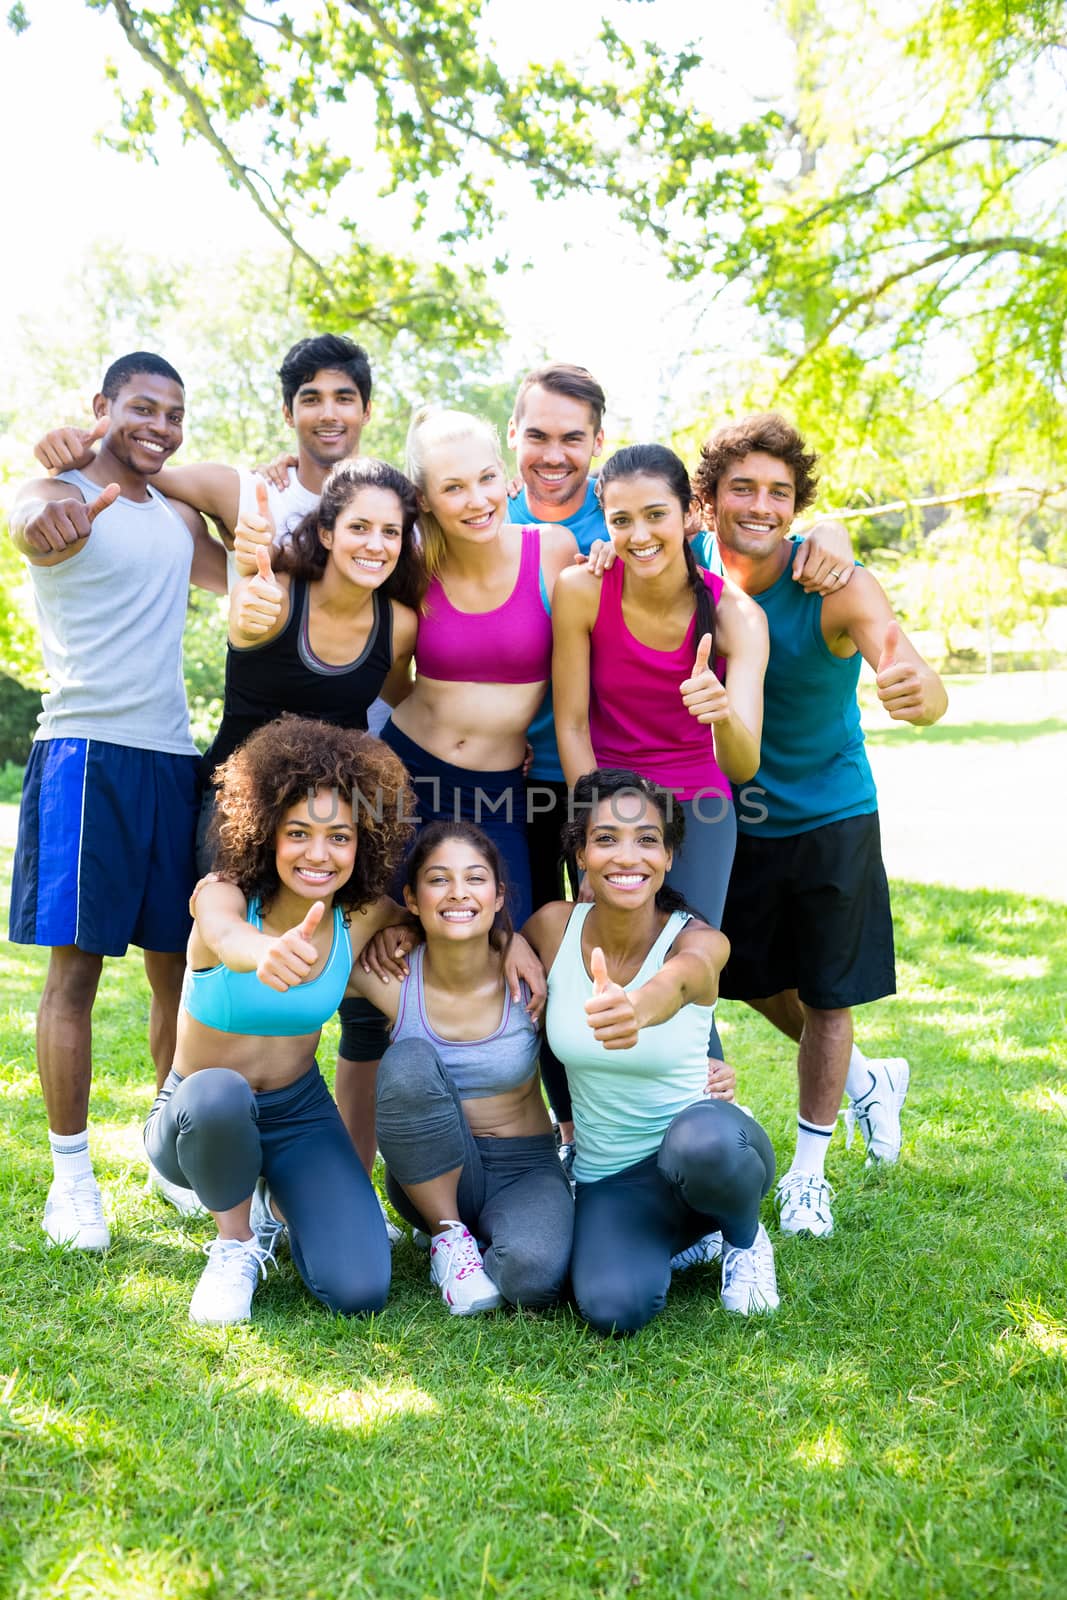 Group portrait of friends in sportswear showing thumbs up at the park